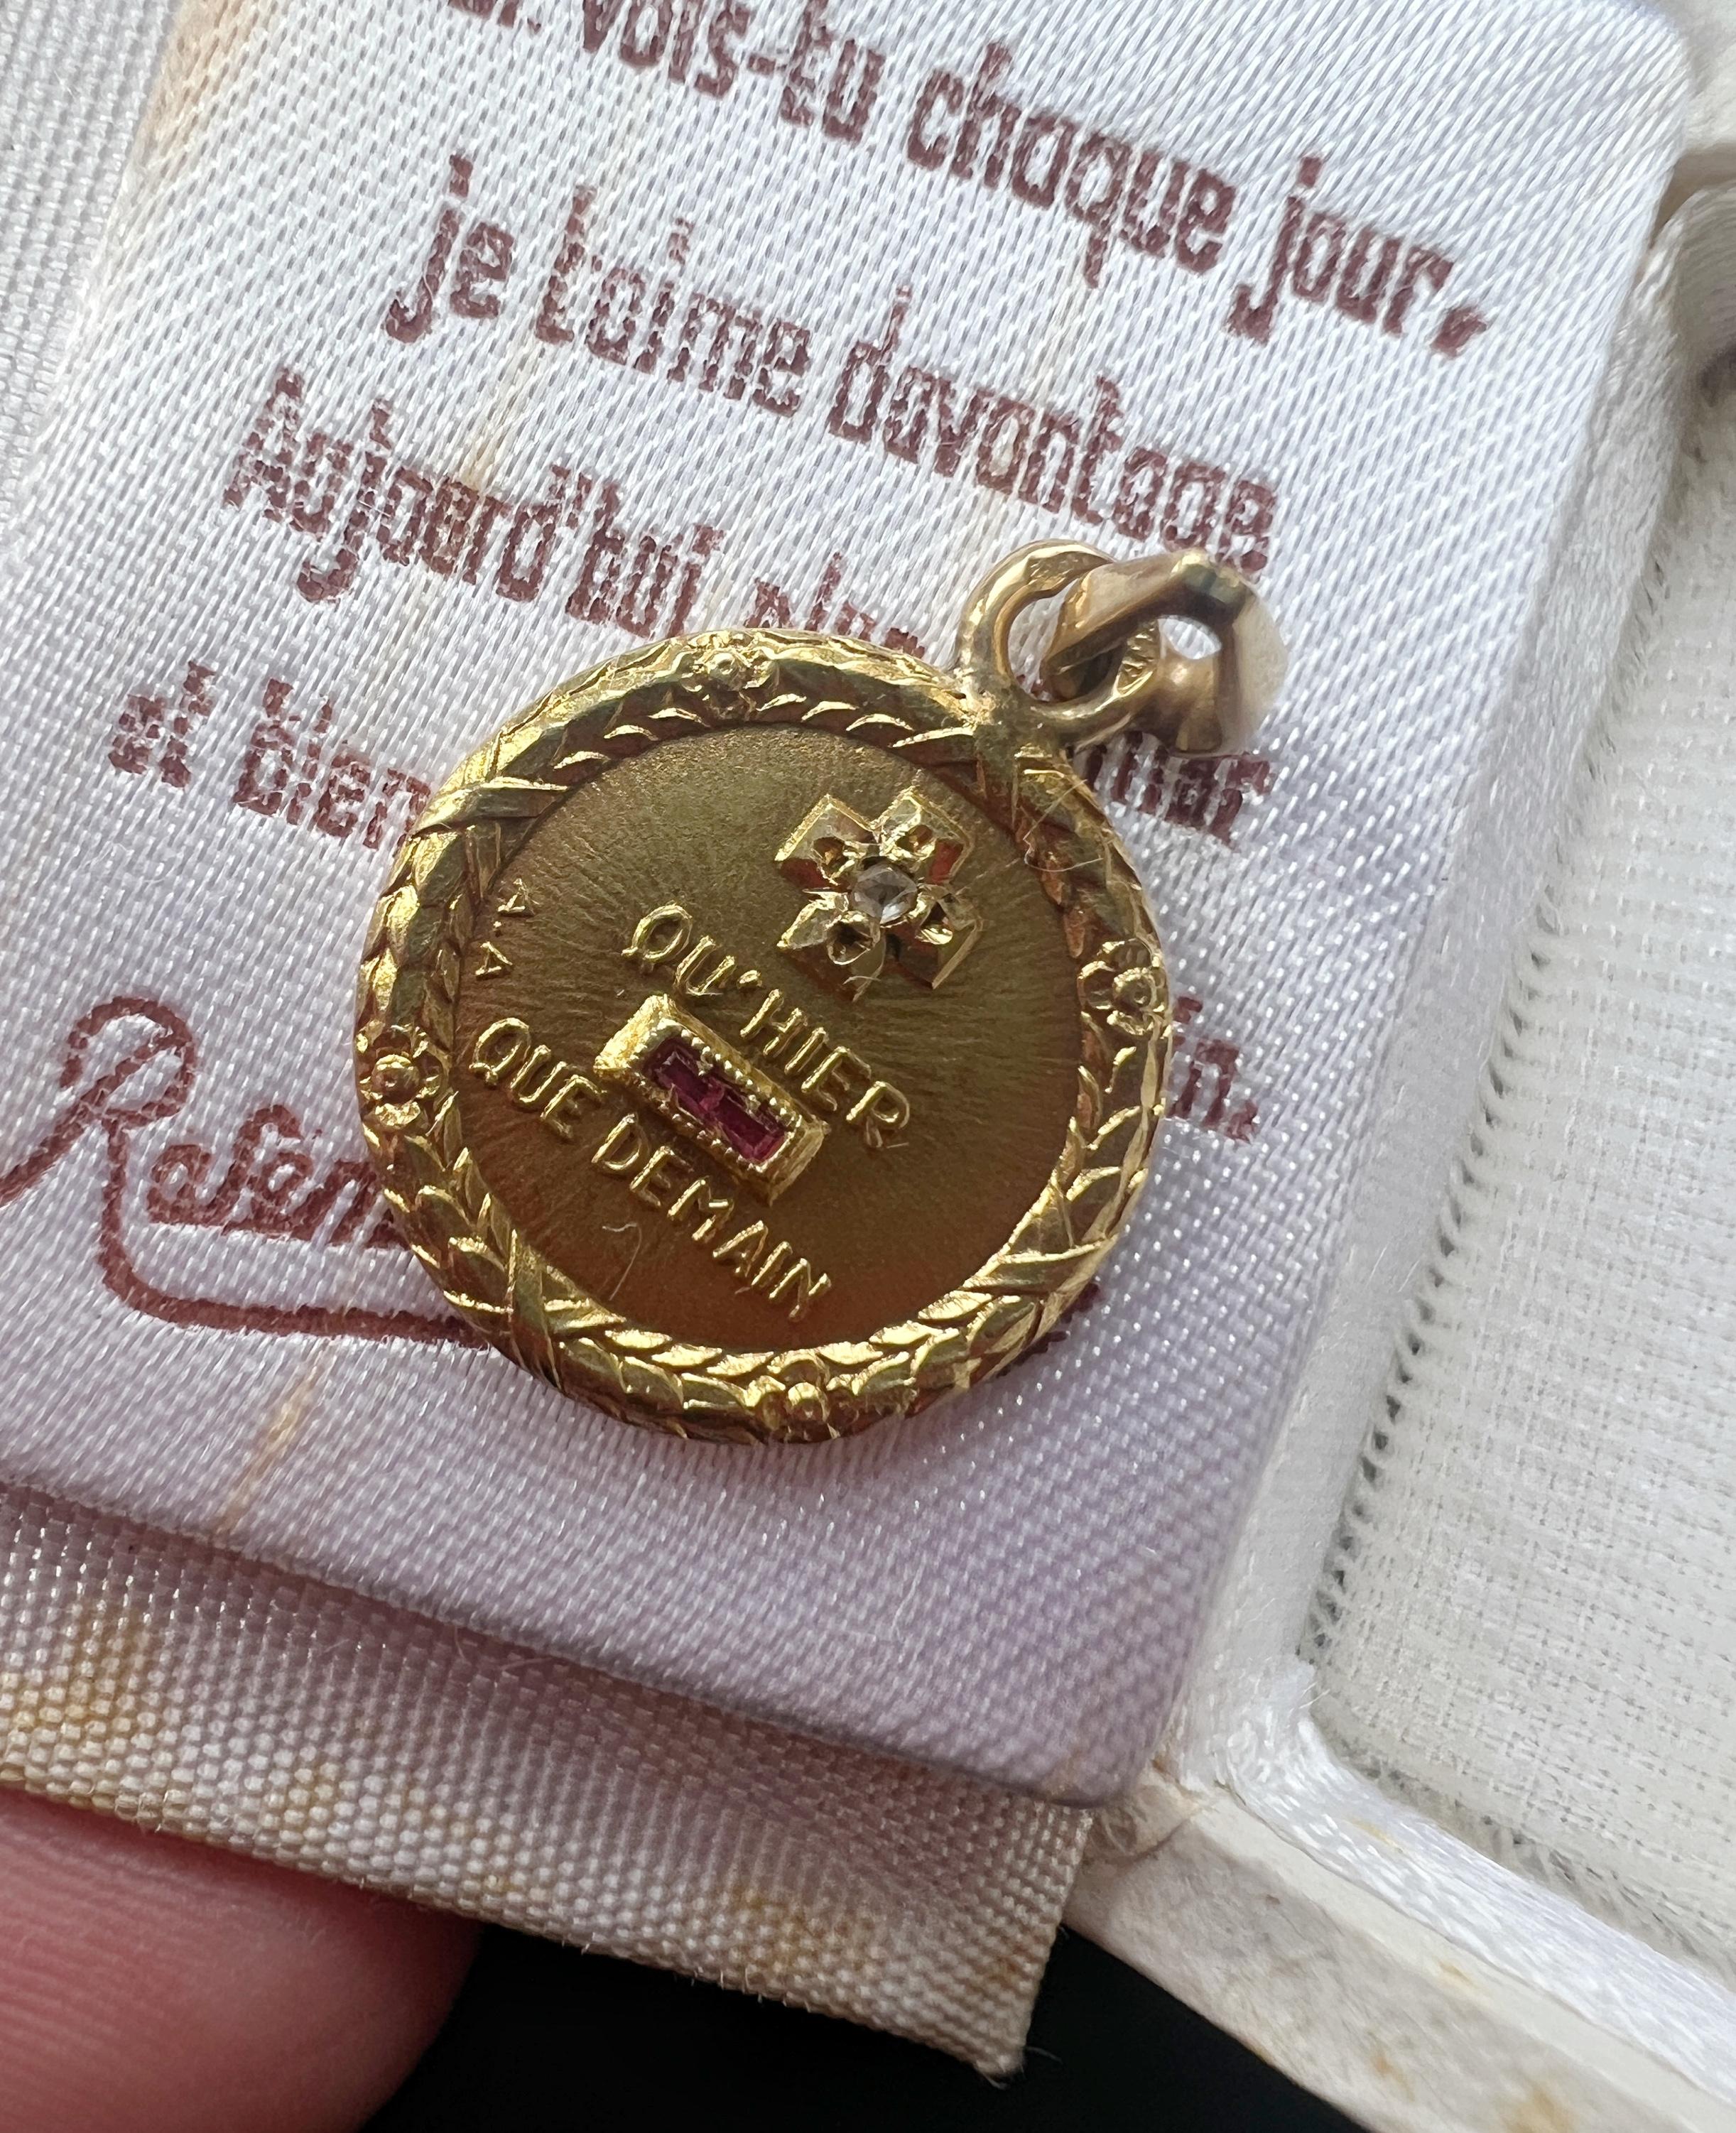 Built upon a romantic French poetry, this French vintage 18K gold Augis medal is precious not only thanks to its sentimental meanings, but also because it comes with its original box, which is rare to find today. Inside of the box it is written the